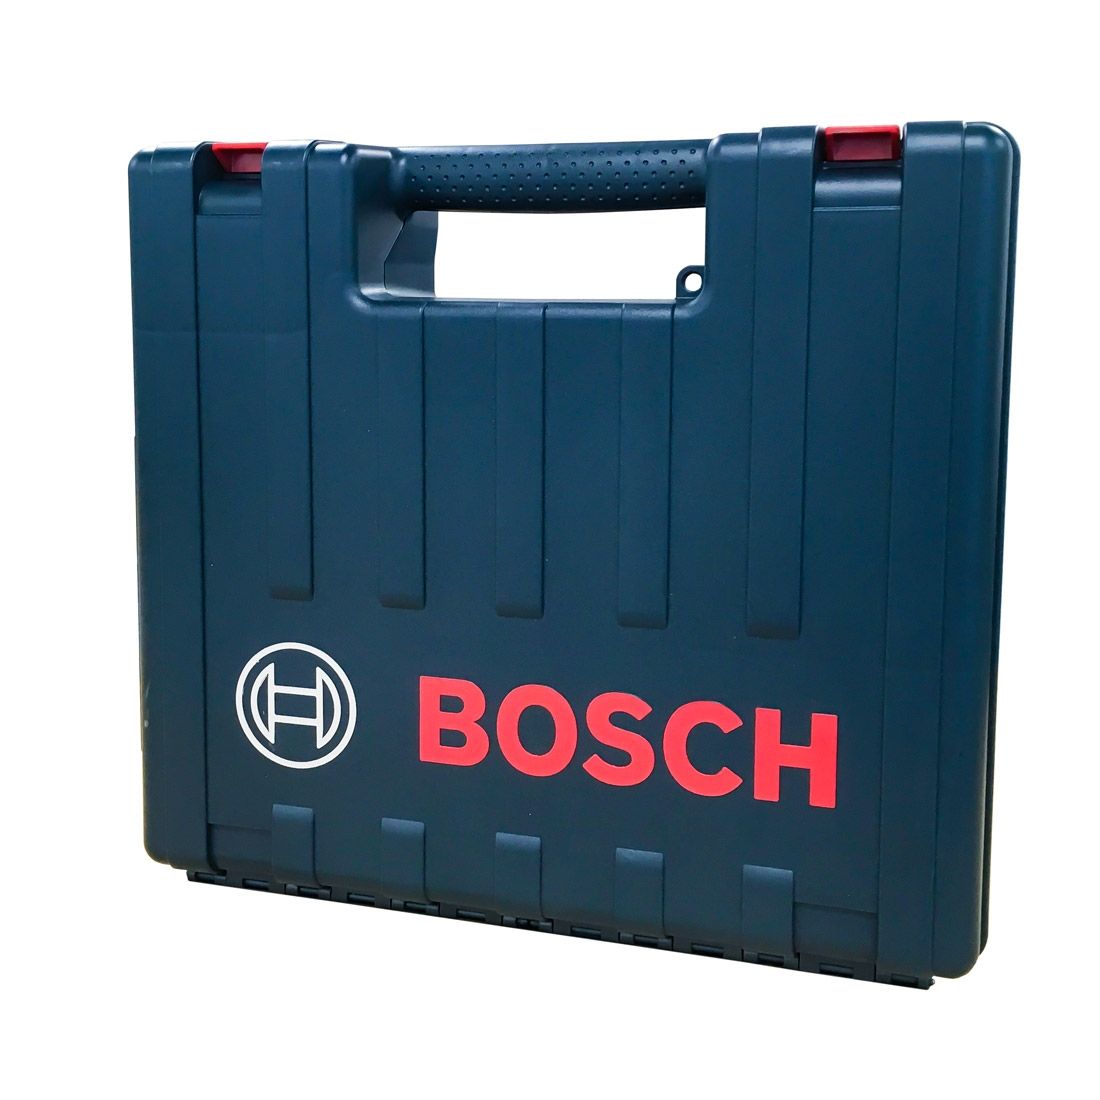 Bosch Professional Drill Professional Bosch 2 Drums Lithium Charger Bag Carry Case Accessories 793518644001 